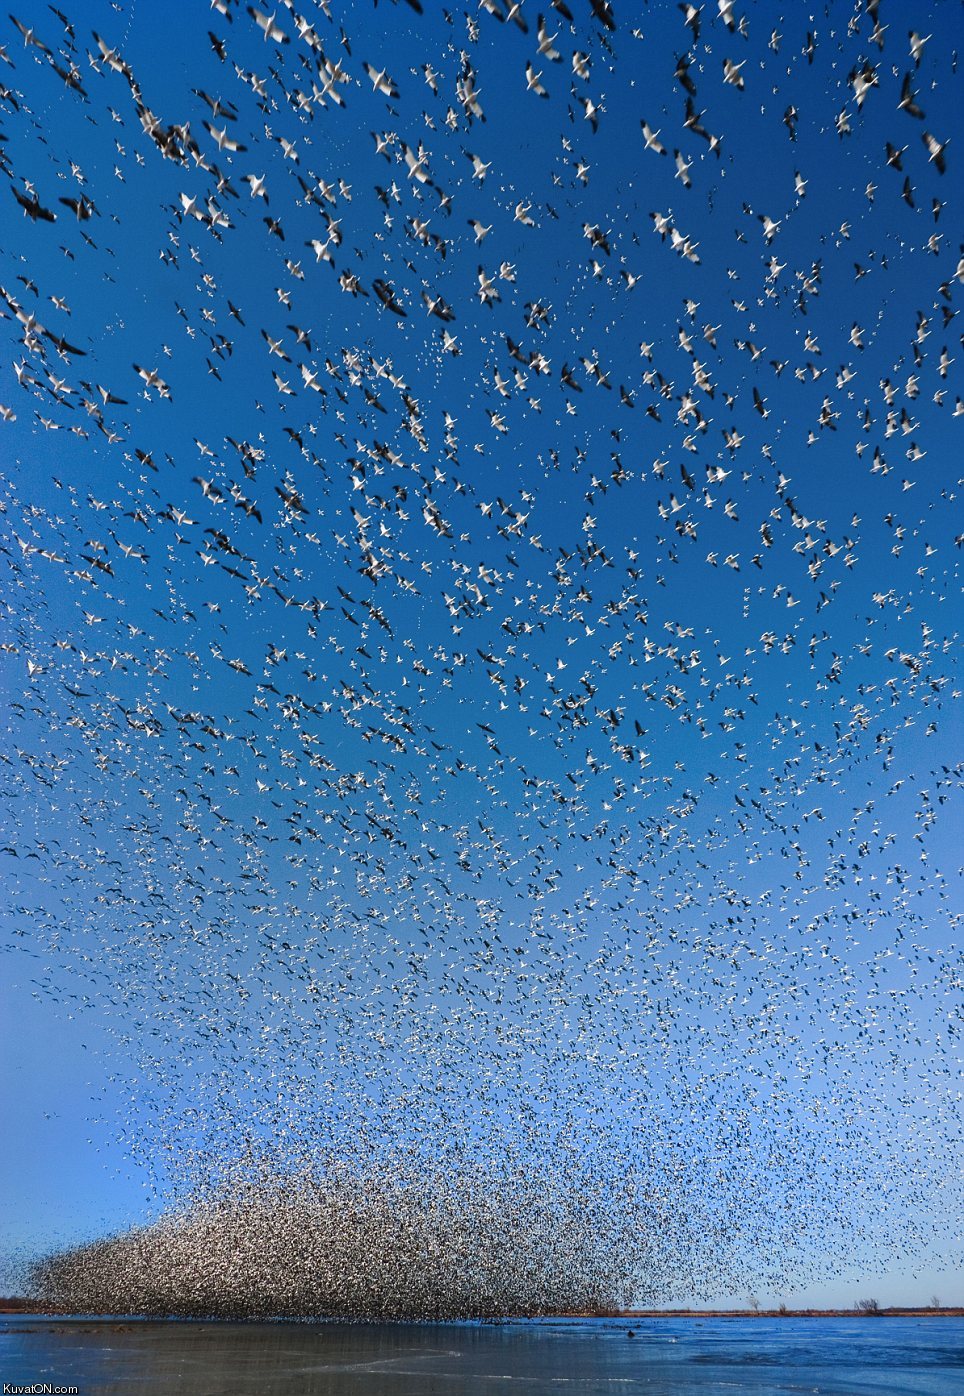 have_you_ever_seen_so_many_birds.jpg